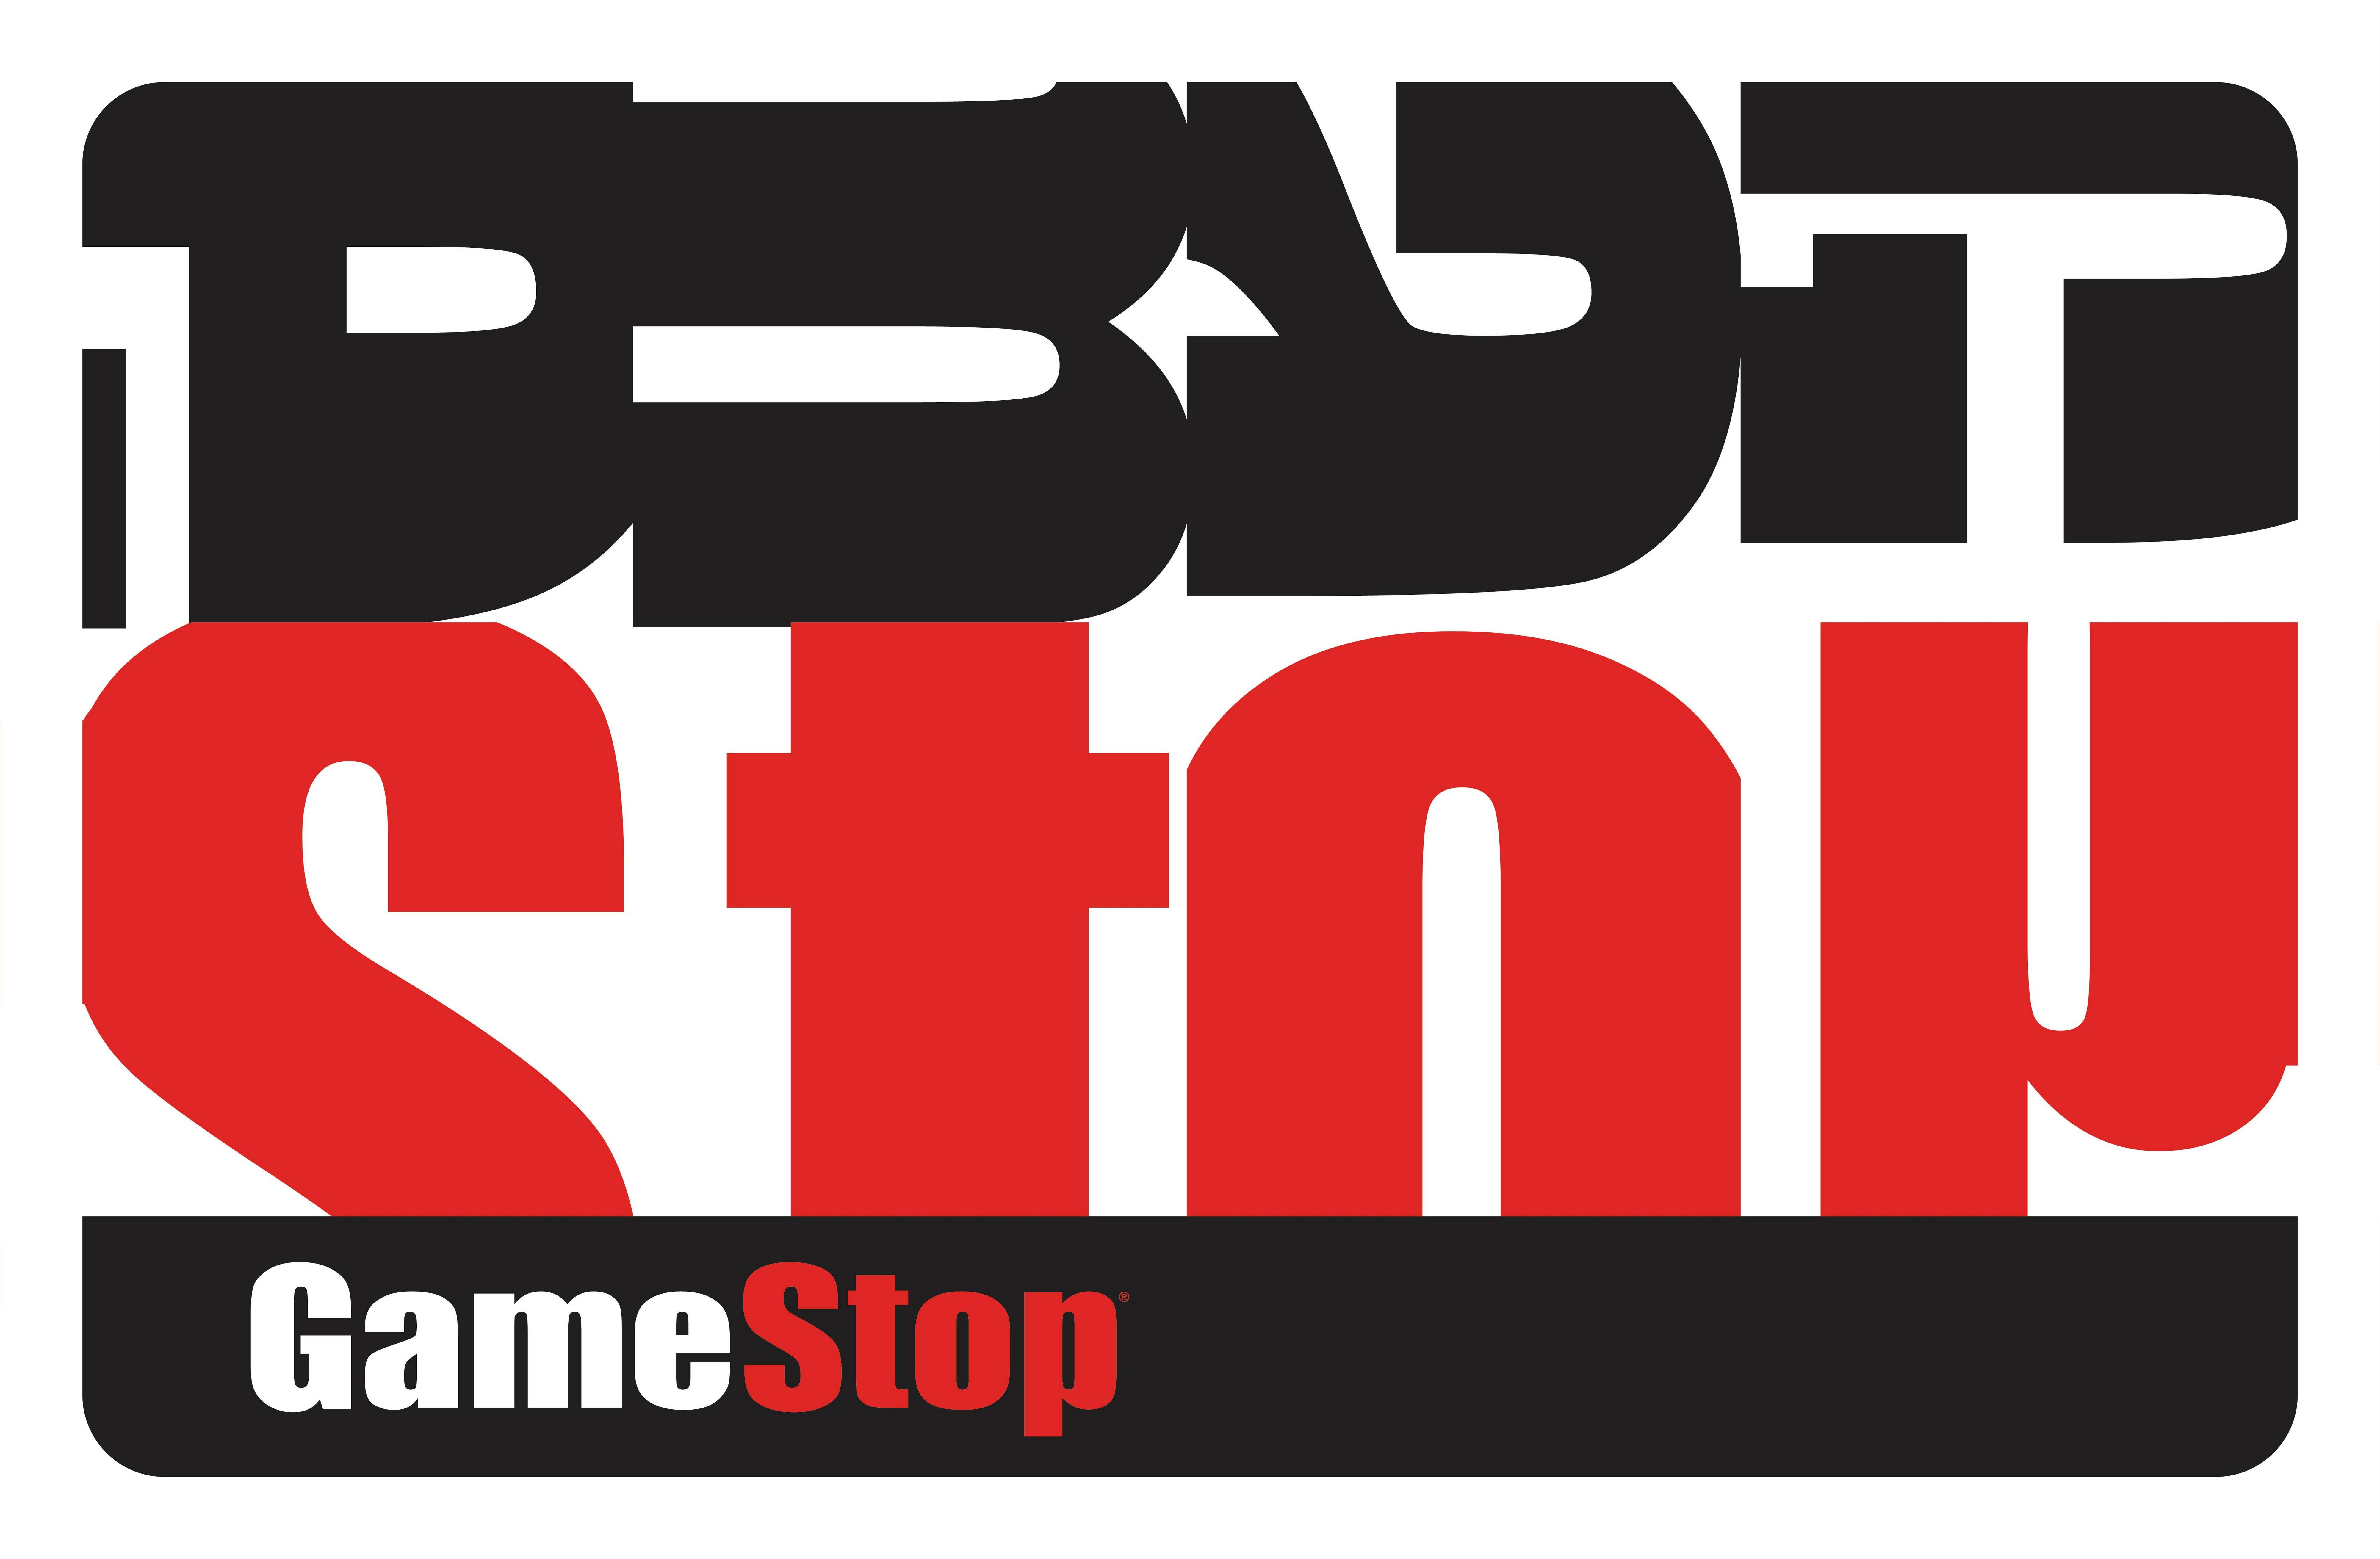 can you buy stuff online with a gamestop gift card